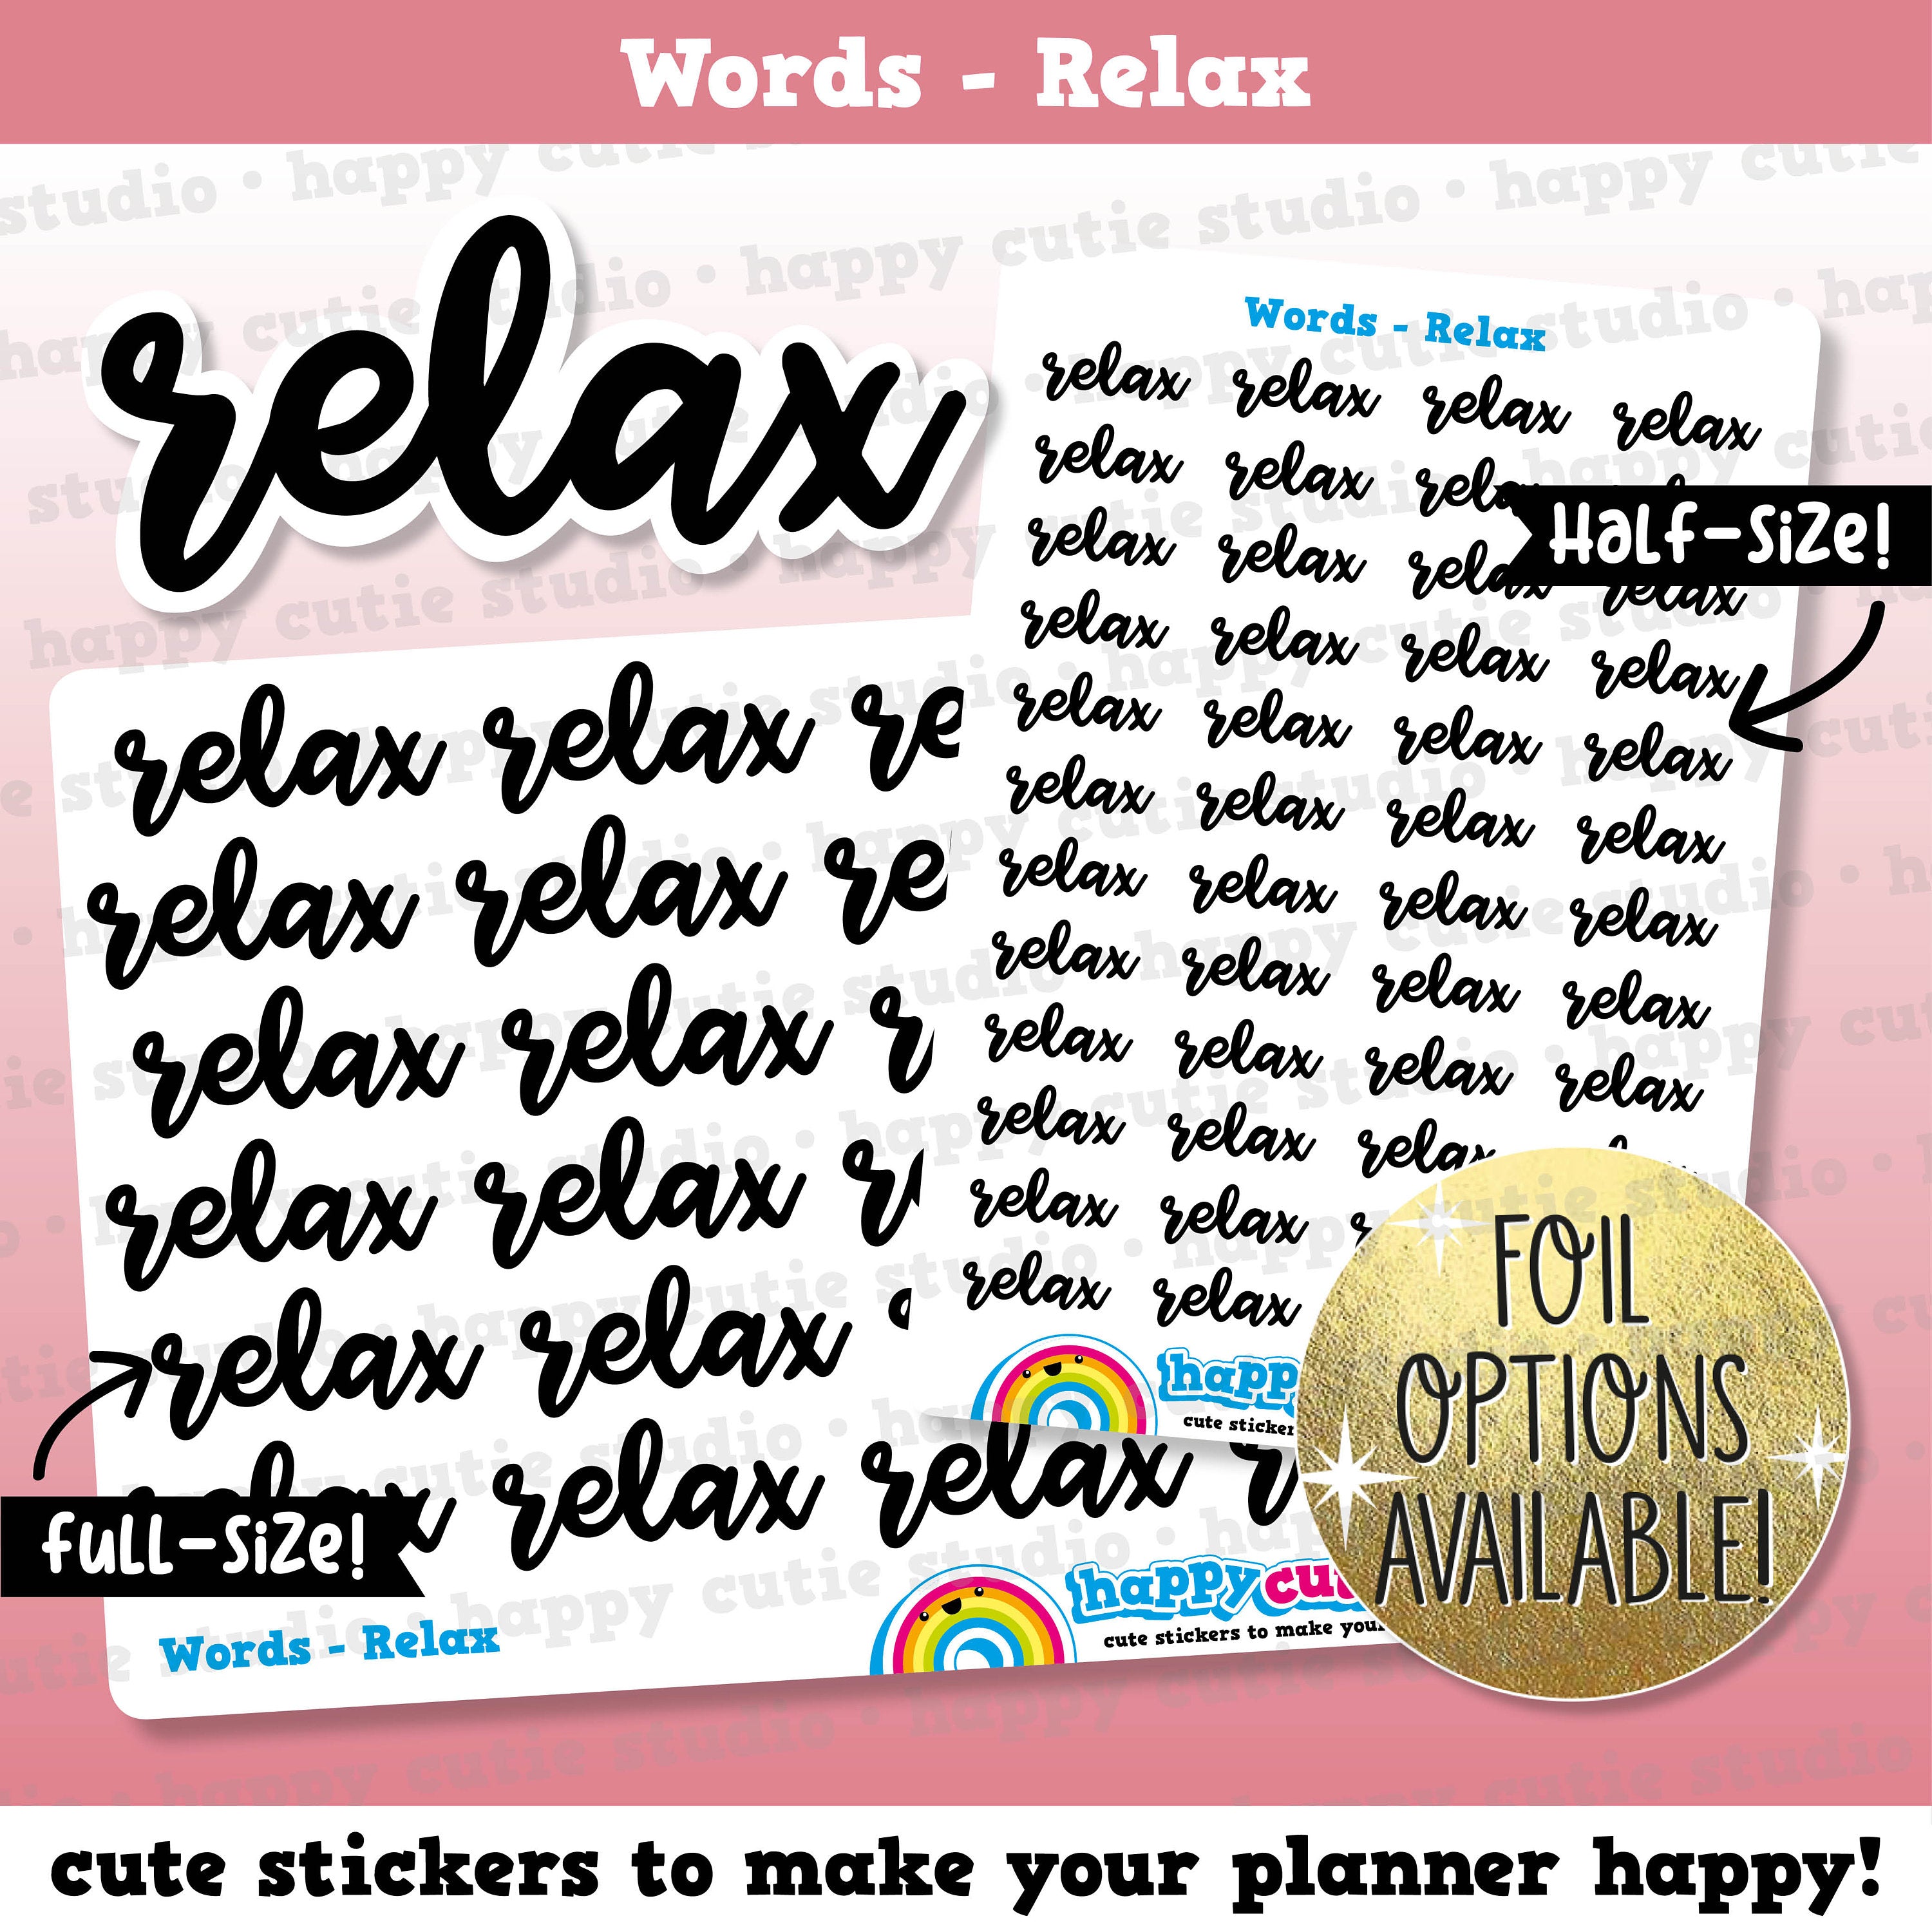 Relax/Functional/Foil Planner Stickers